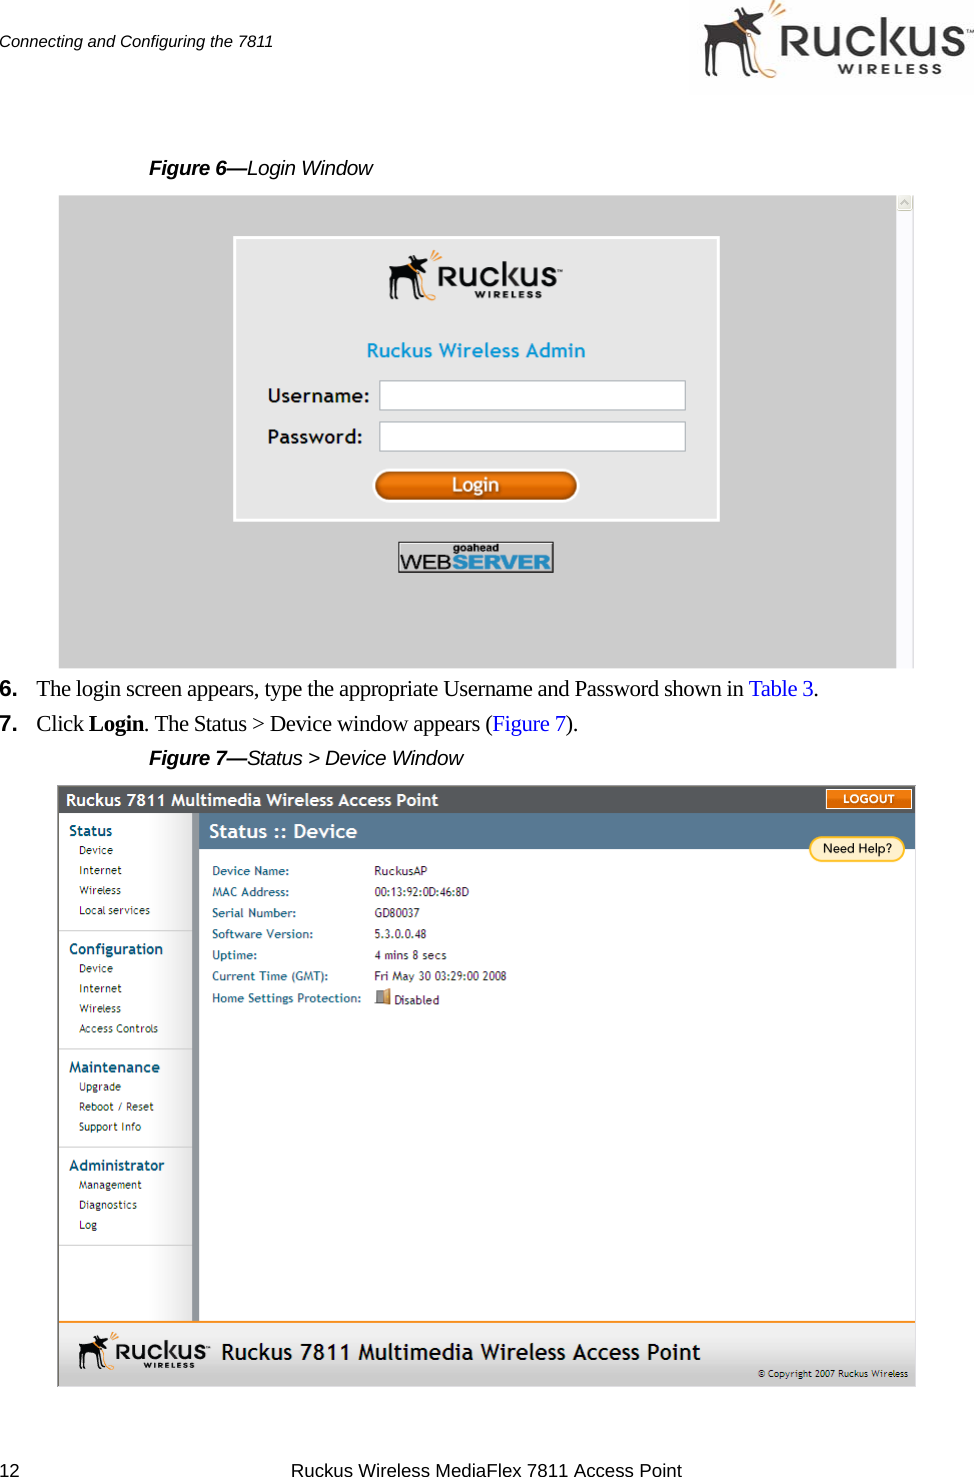 12 Ruckus Wireless MediaFlex 7811 Access PointConnecting and Configuring the 7811Figure 6—Login Window6. The login screen appears, type the appropriate Username and Password shown in Table 3. 7. Click Login. The Status &gt; Device window appears (Figure 7).Figure 7—Status &gt; Device Window